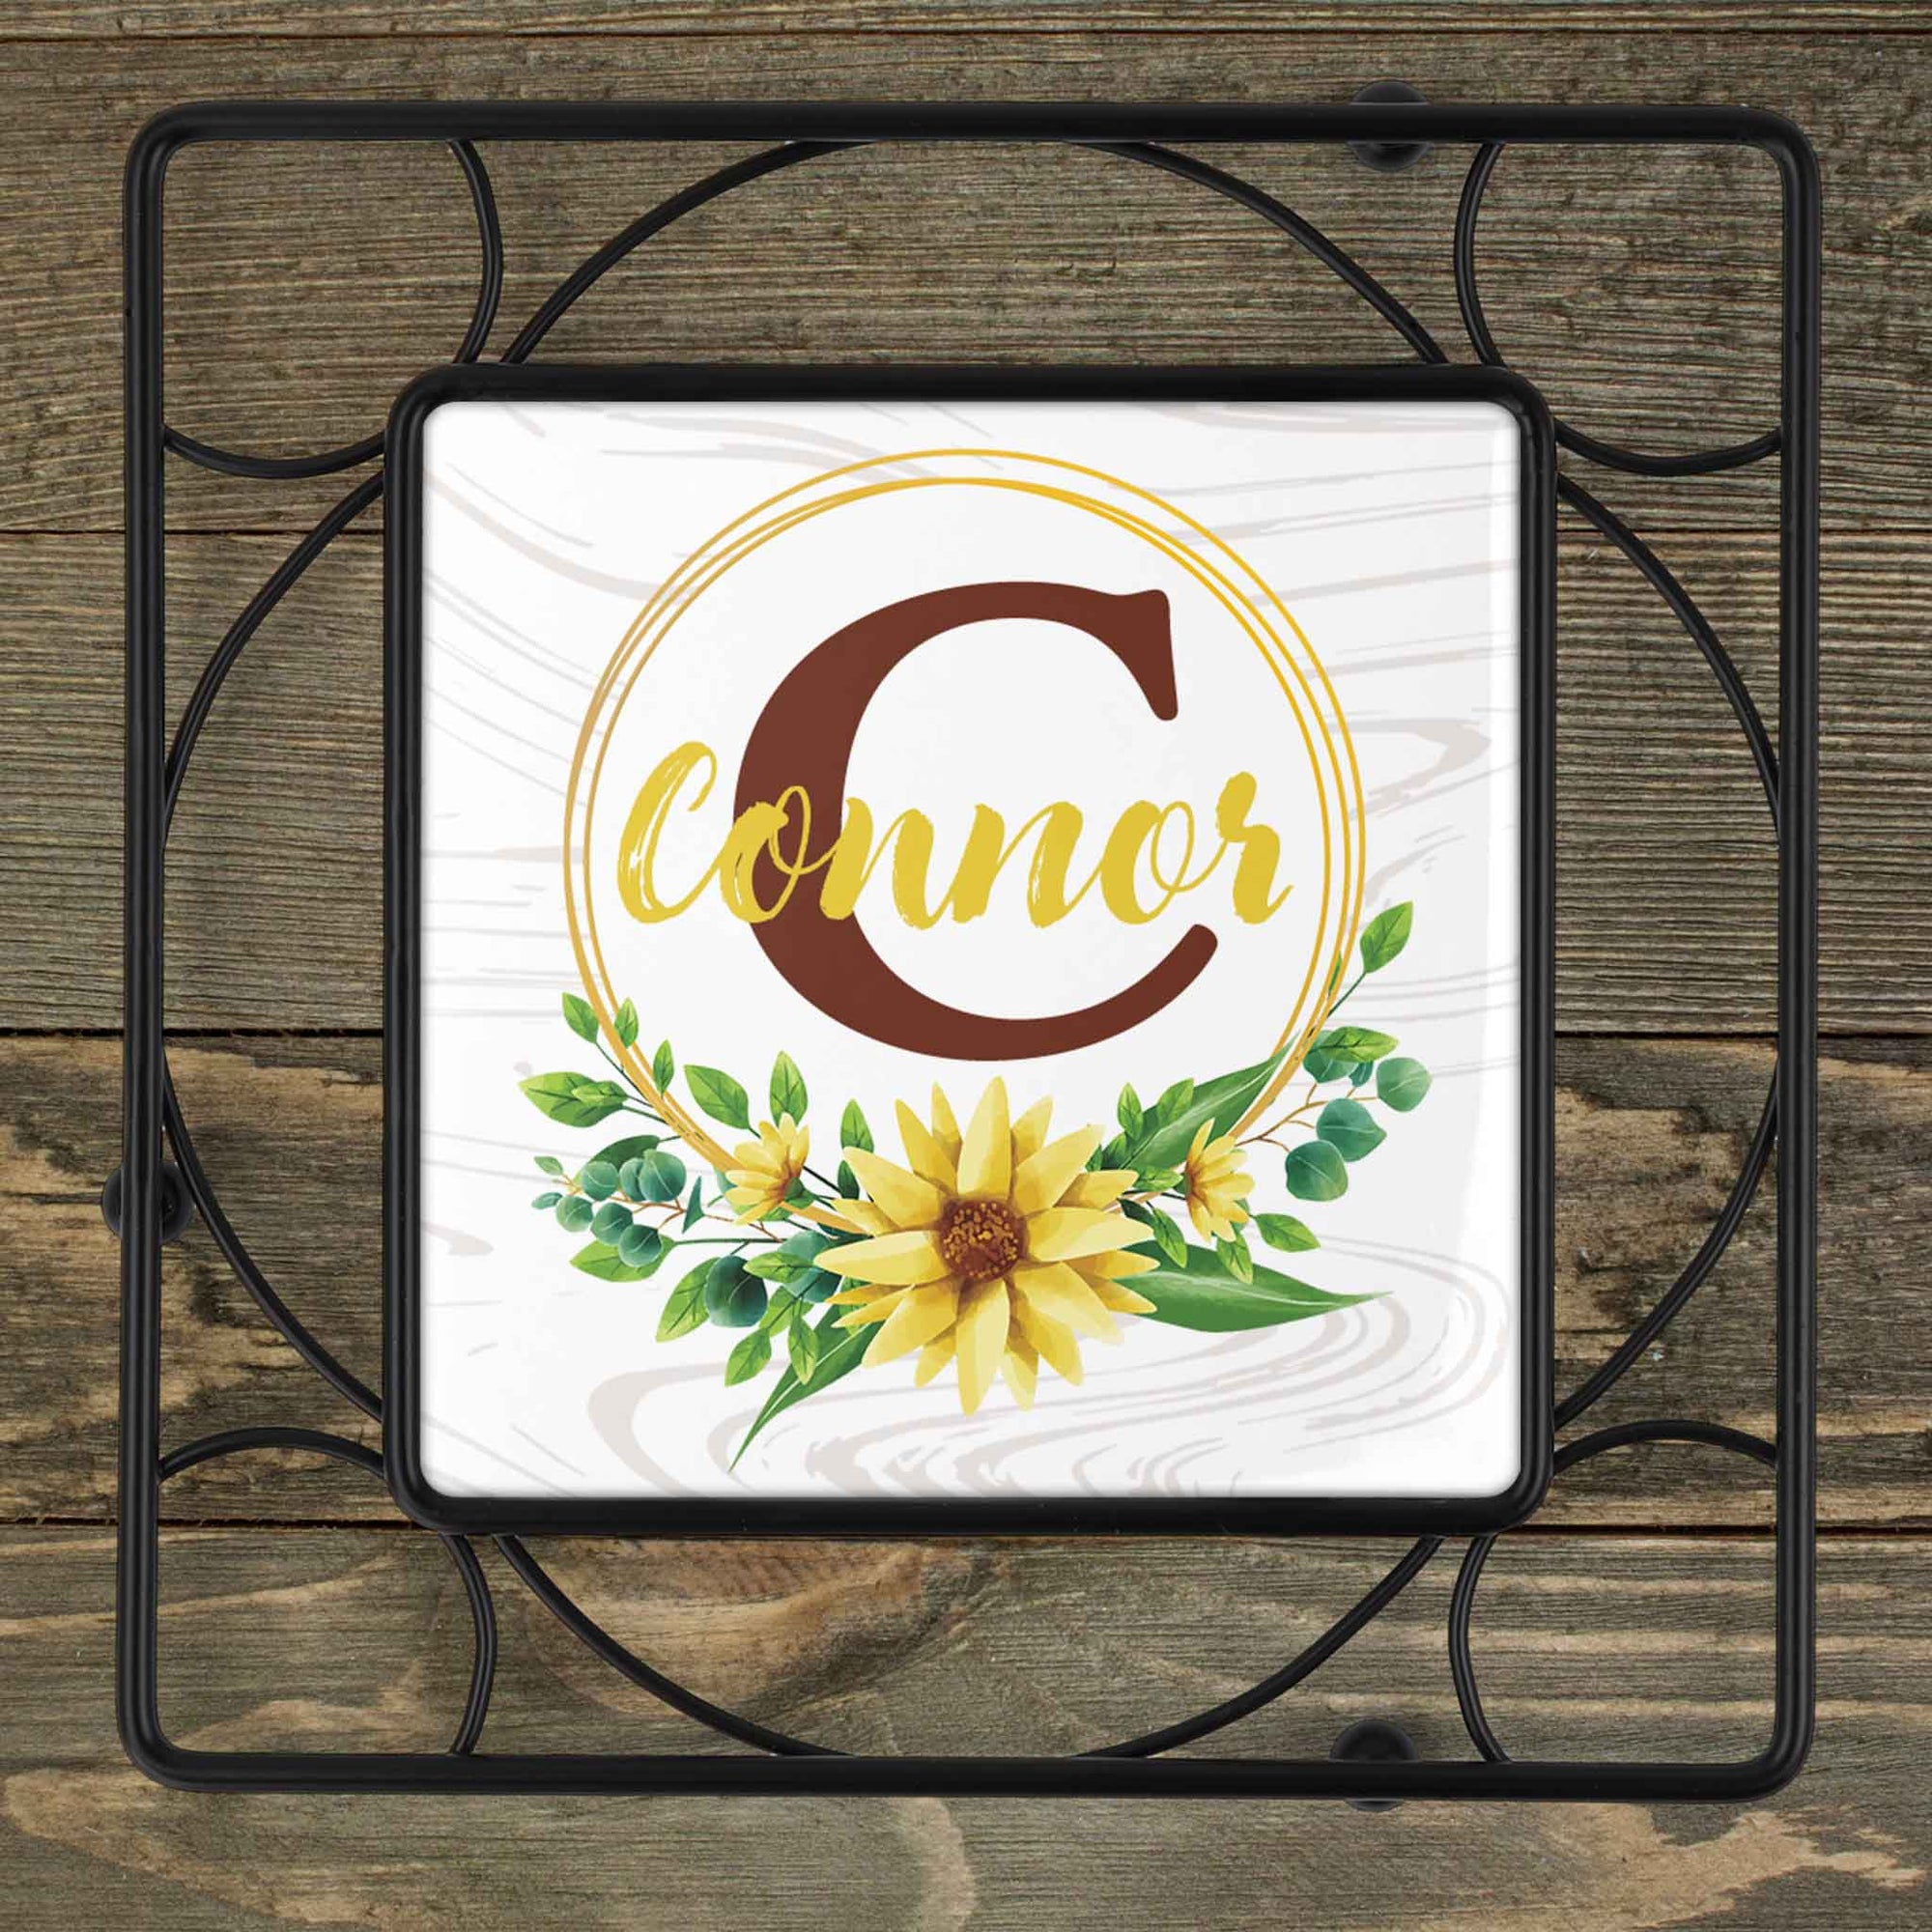 Trivets - This & That Solutions - Personalized Gifts & Custom Home Decor